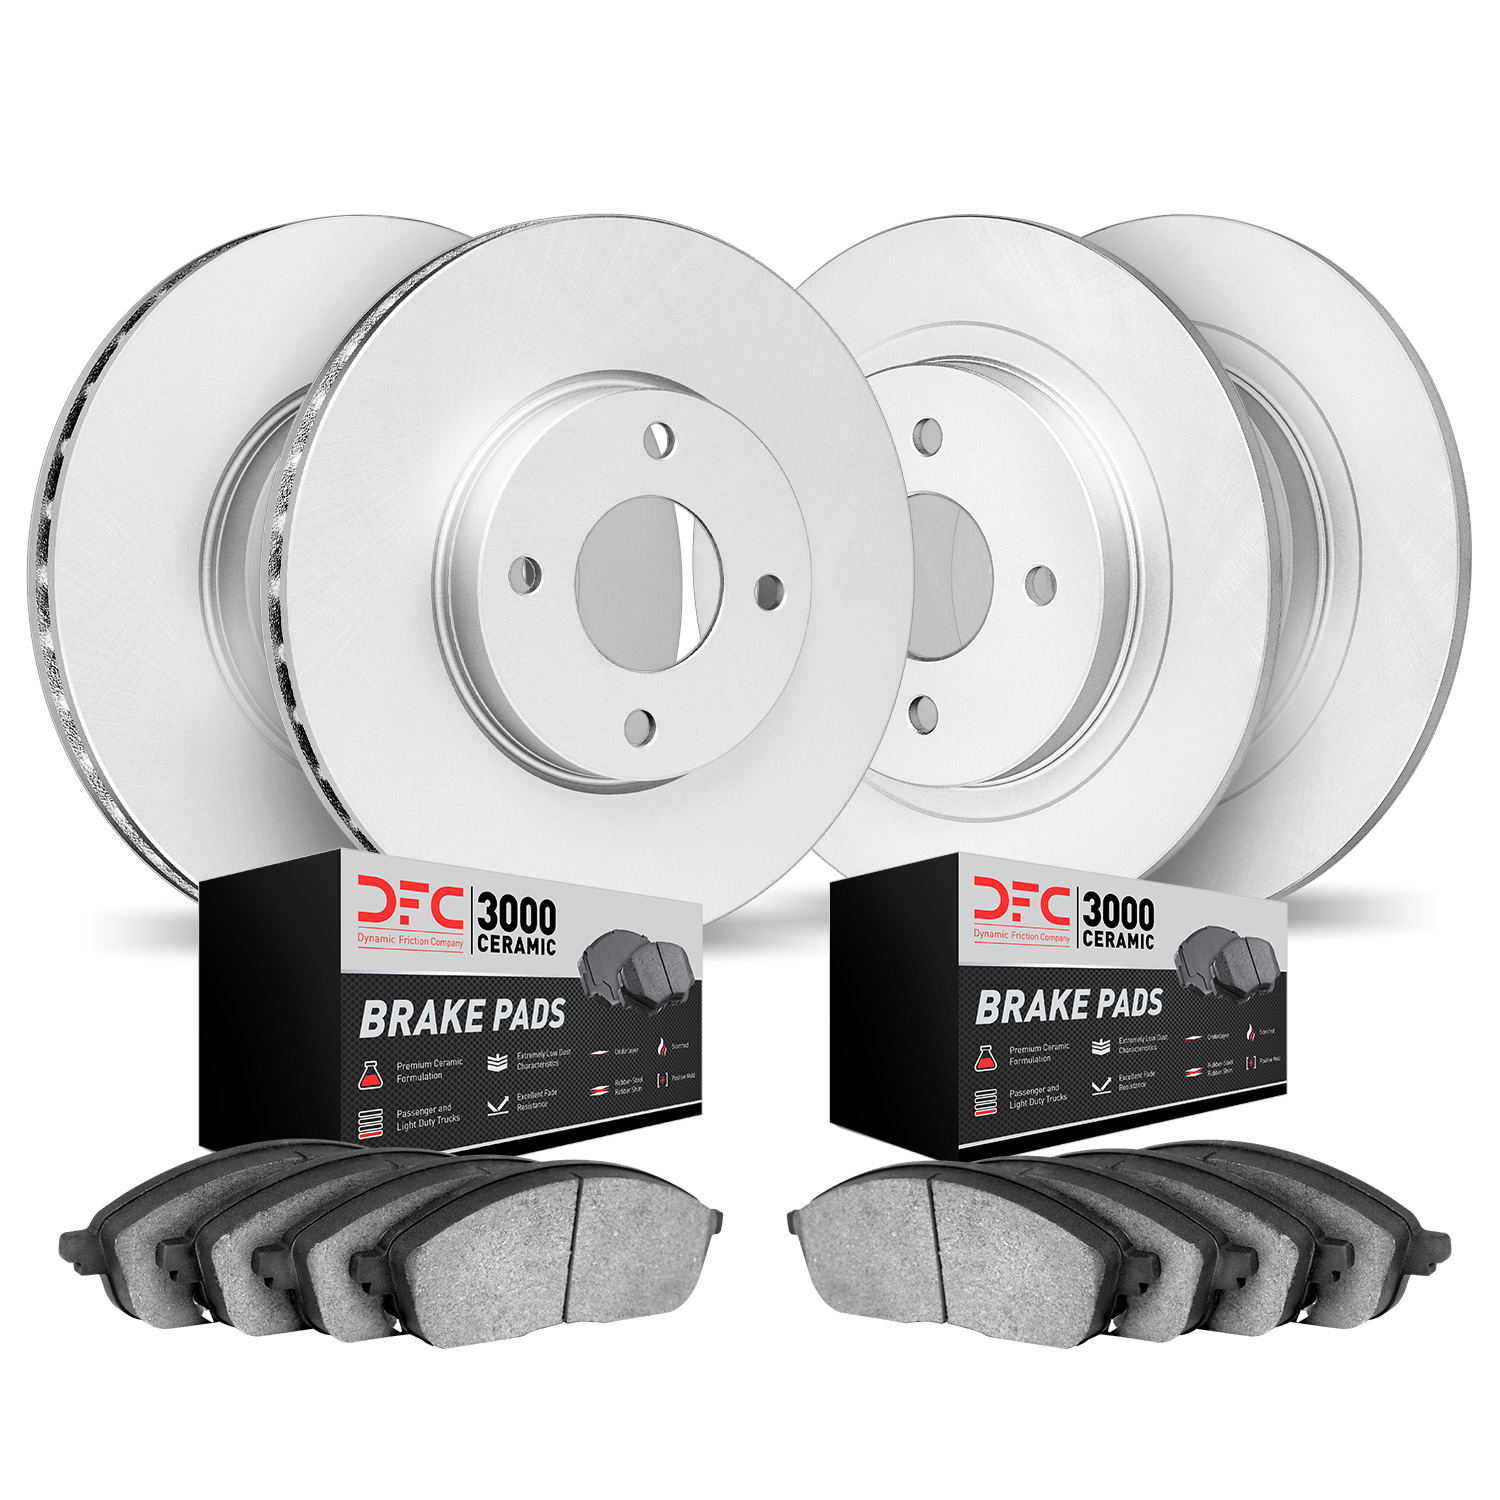 4304-74010 Geospec Brake Rotors with 3000-Series Ceramic Brake Pads Kit, 1986-2002 Audi/Volkswagen, Position: Front and Rear